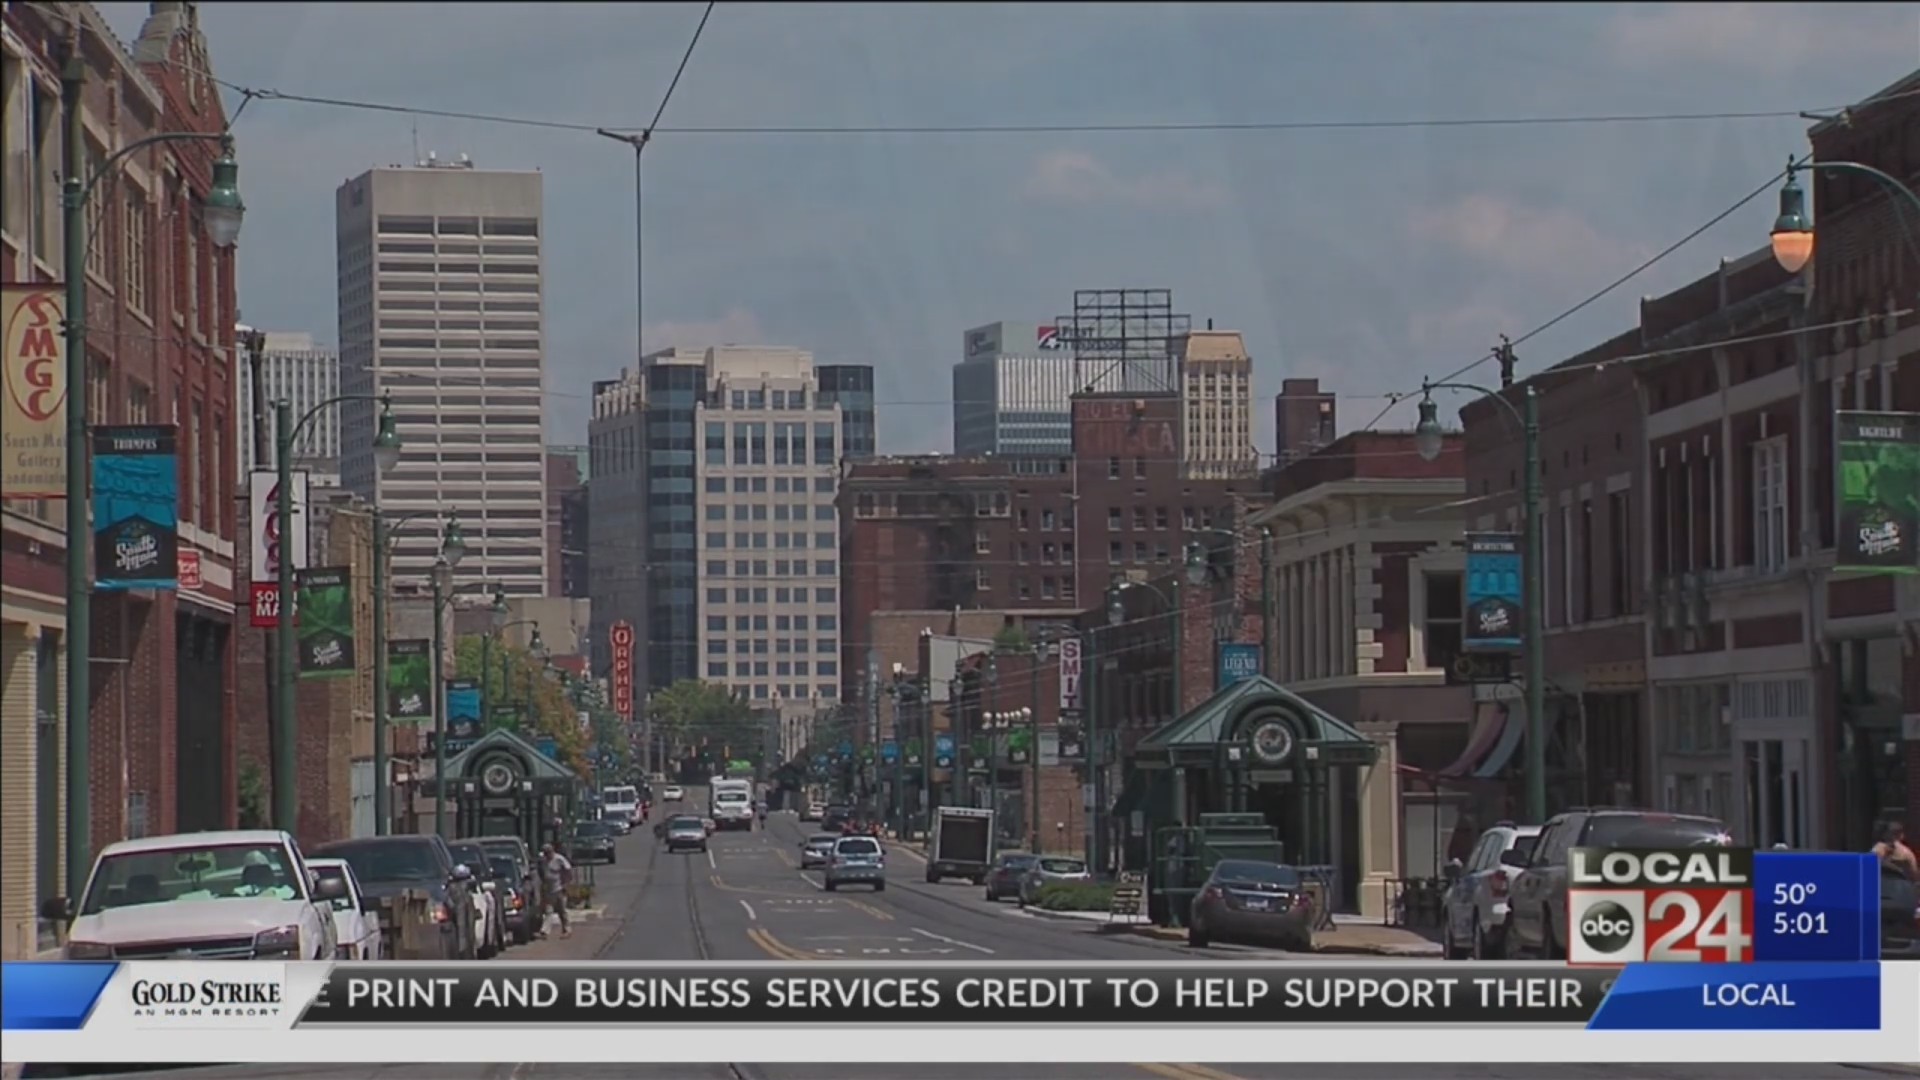 Memphis doesn't have enough money to pay its bills, according to report